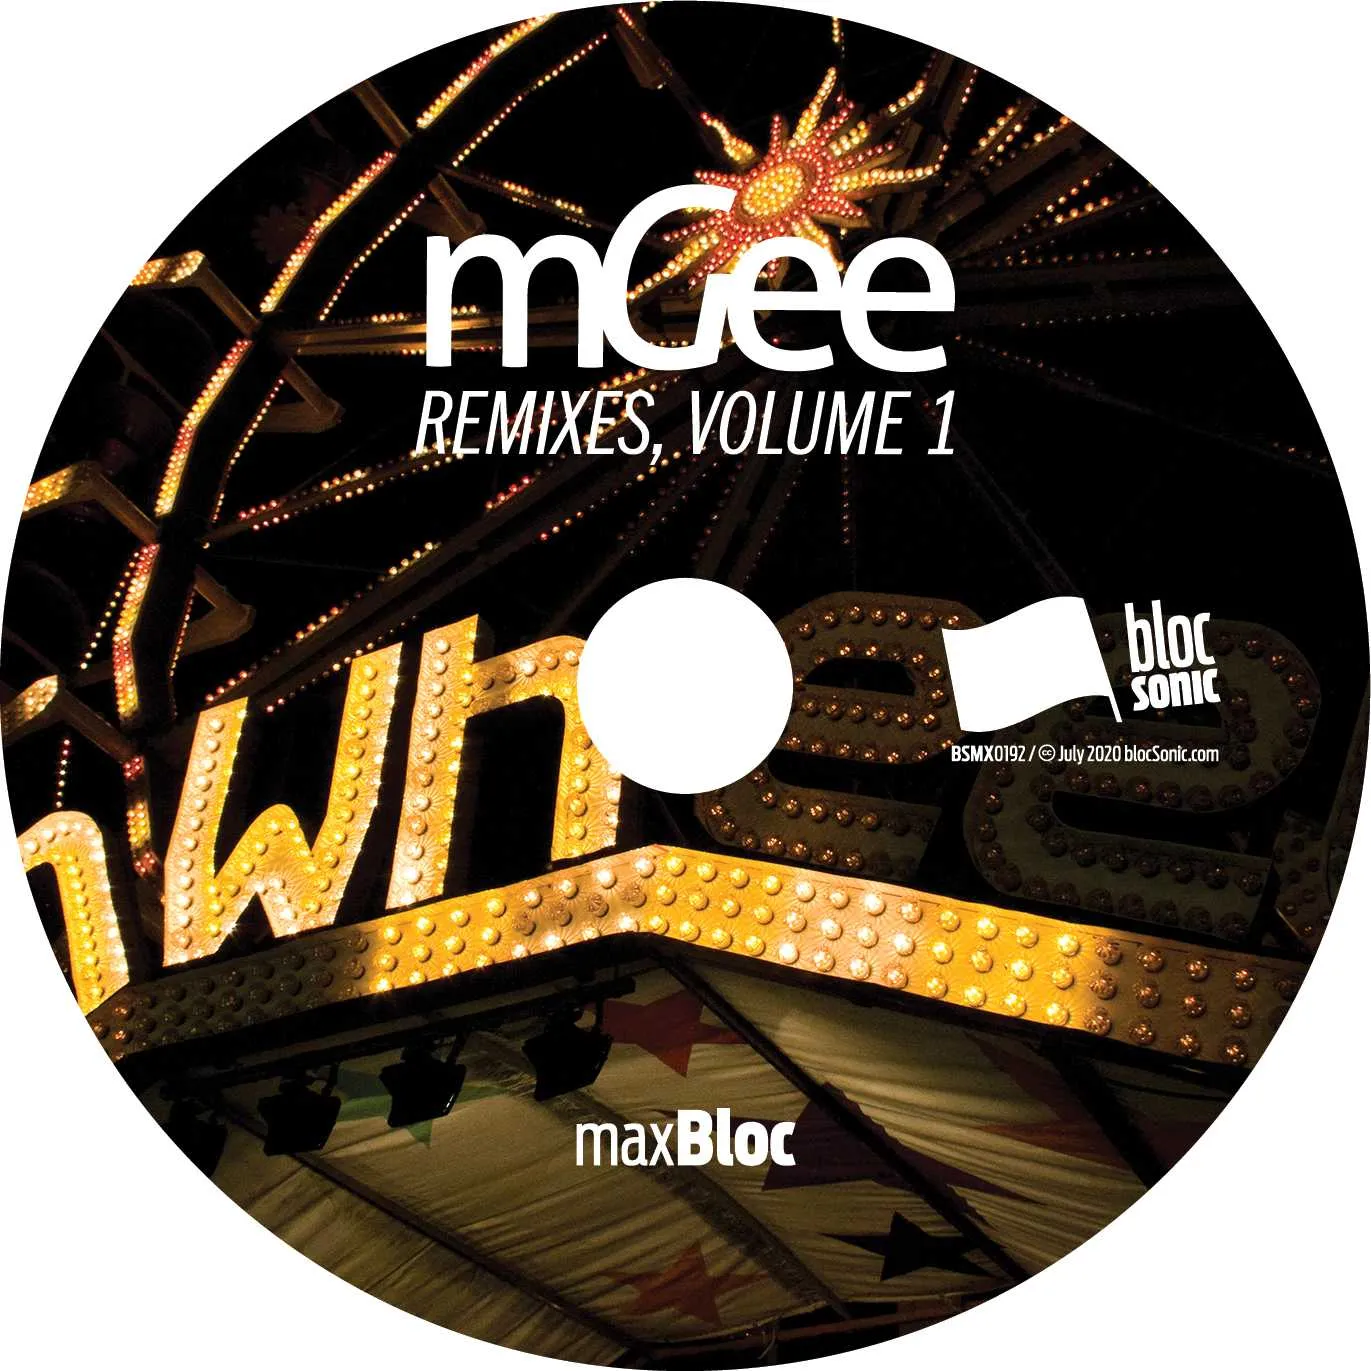 Album disc for “Remixes, Volume 1” by mGee